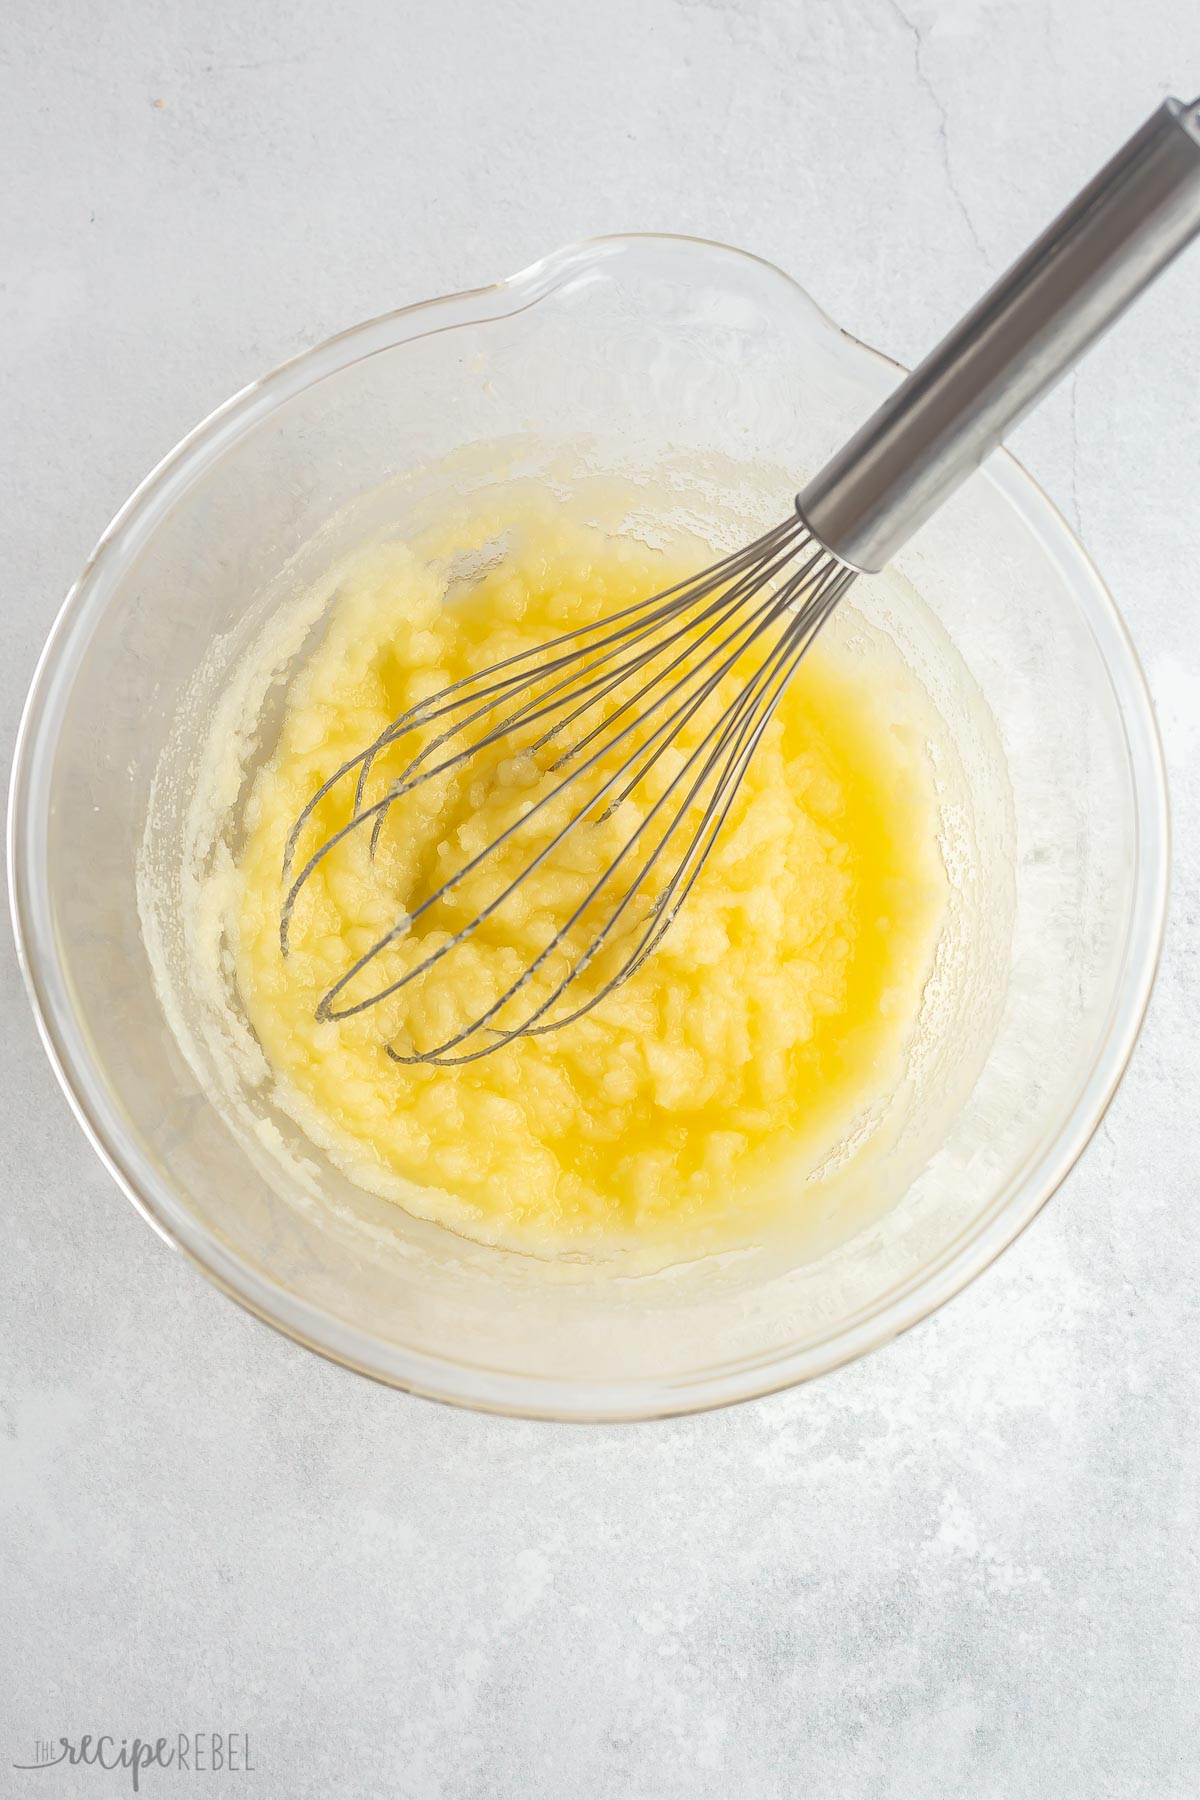 sugar and melted butter whisked together in glass bowl.